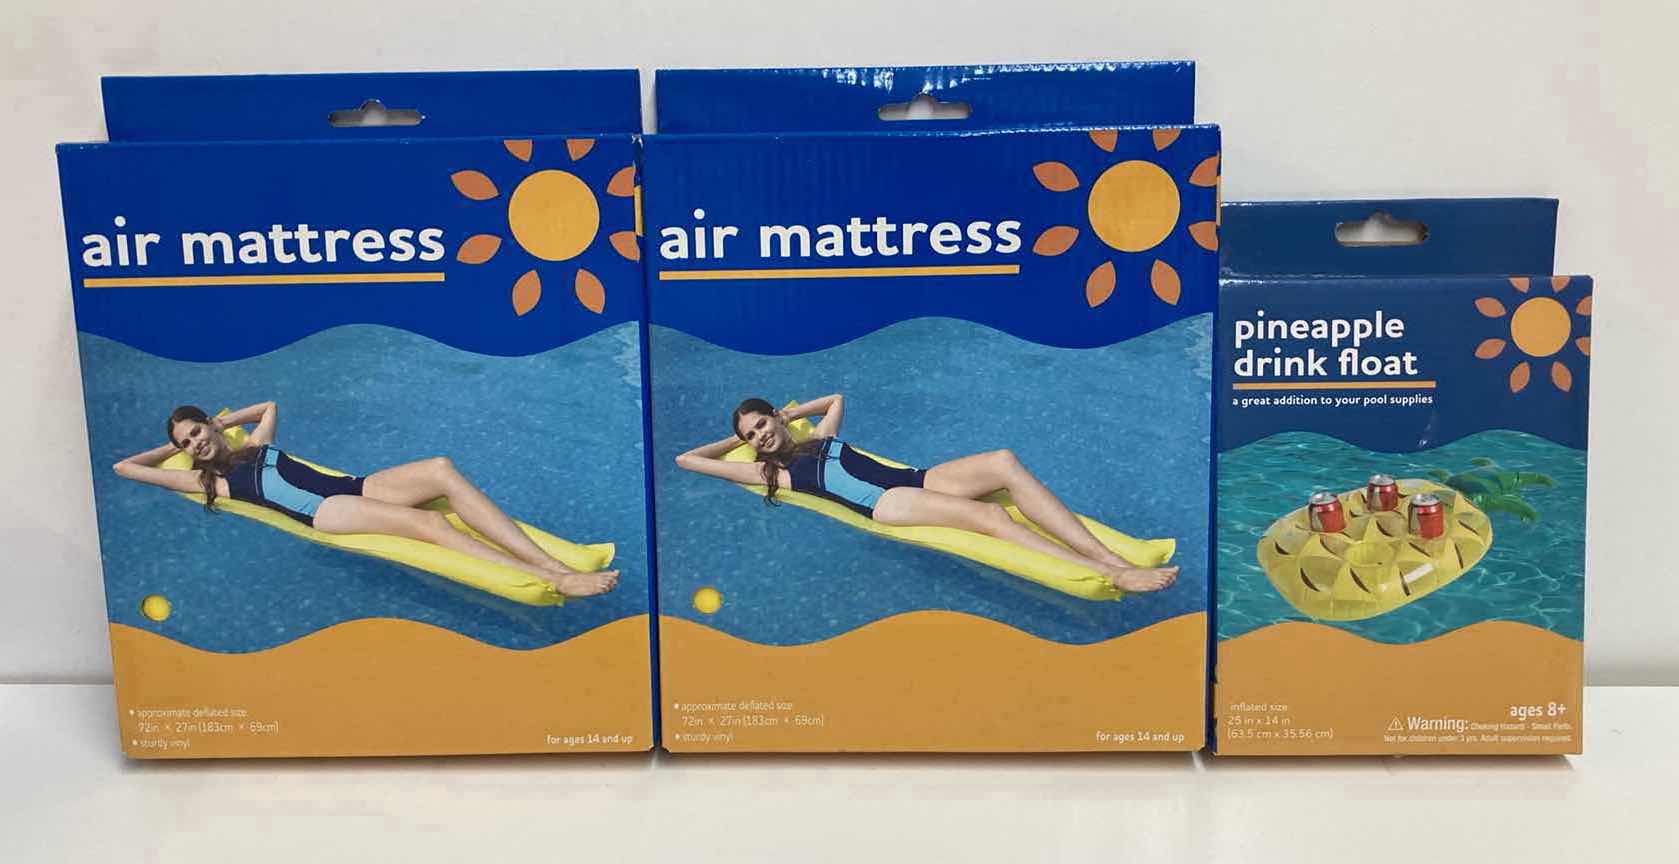 Photo 1 of RITE AID 2 AIR MATTRESS & PINEAPPLE DRINK FLOAT